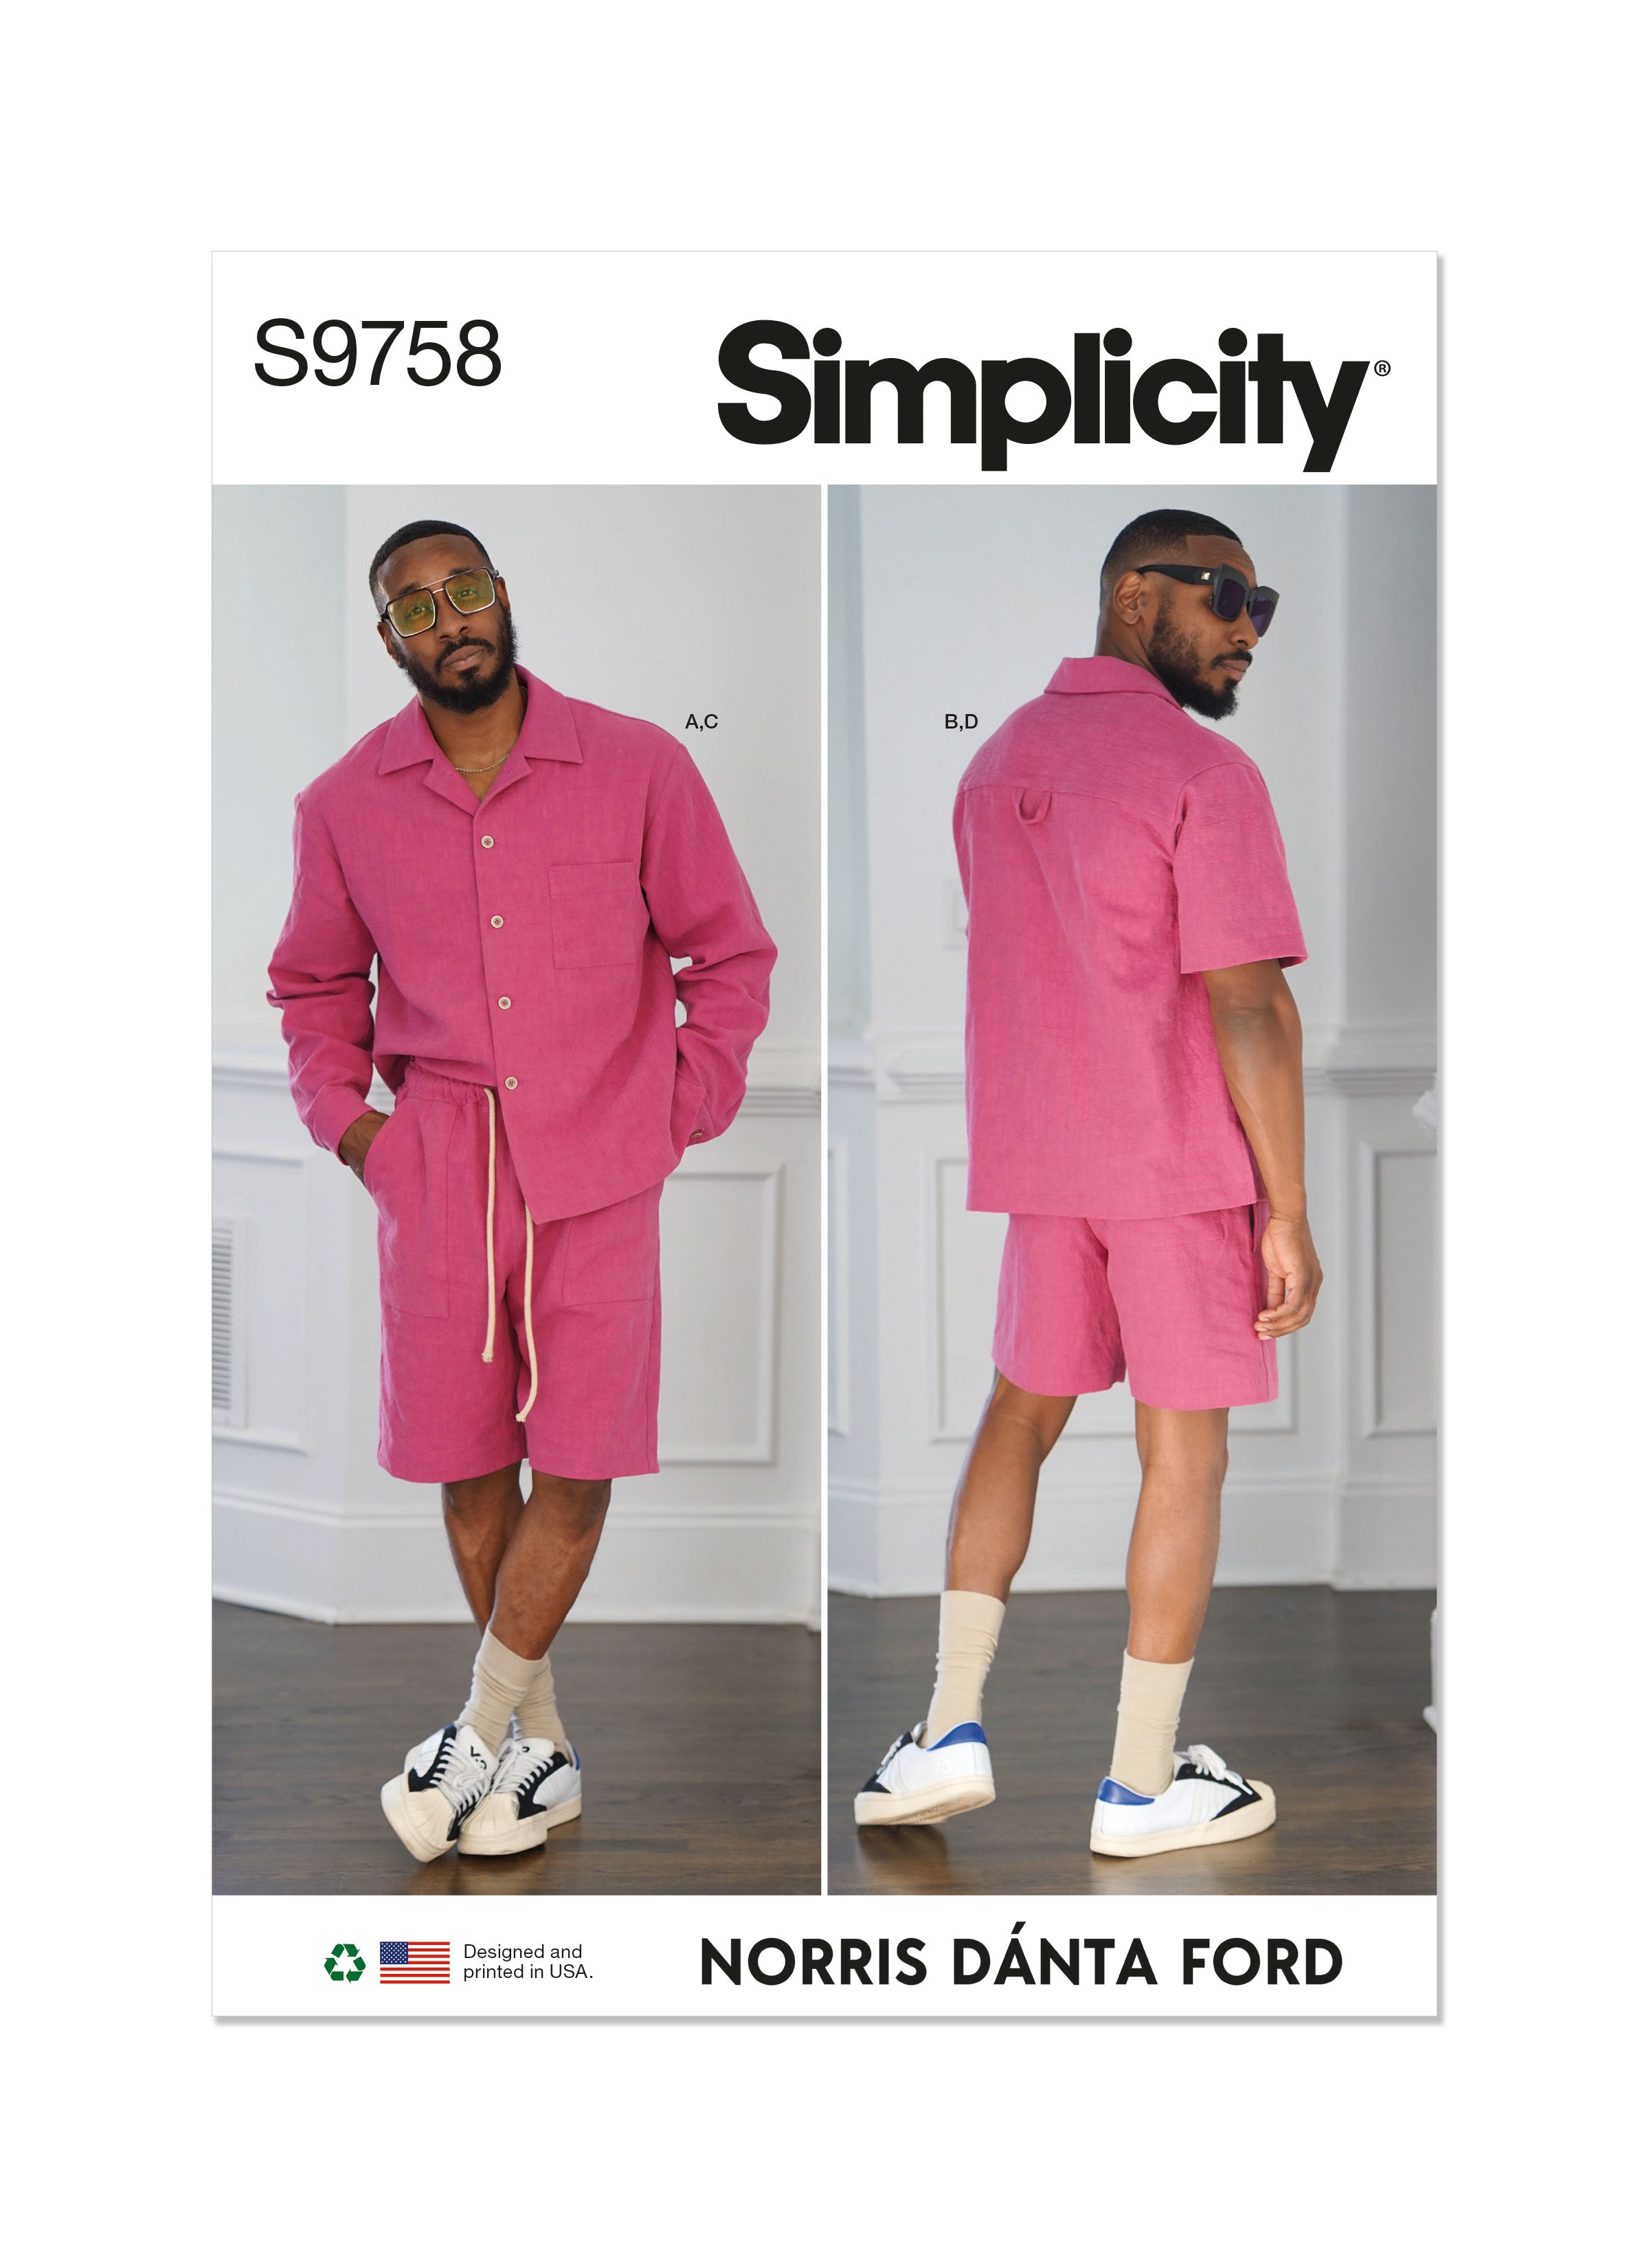 Simplicity 9758 sewing pattern Men's Shirts and Shorts by Norris Danta Ford from Jaycotts Sewing Supplies